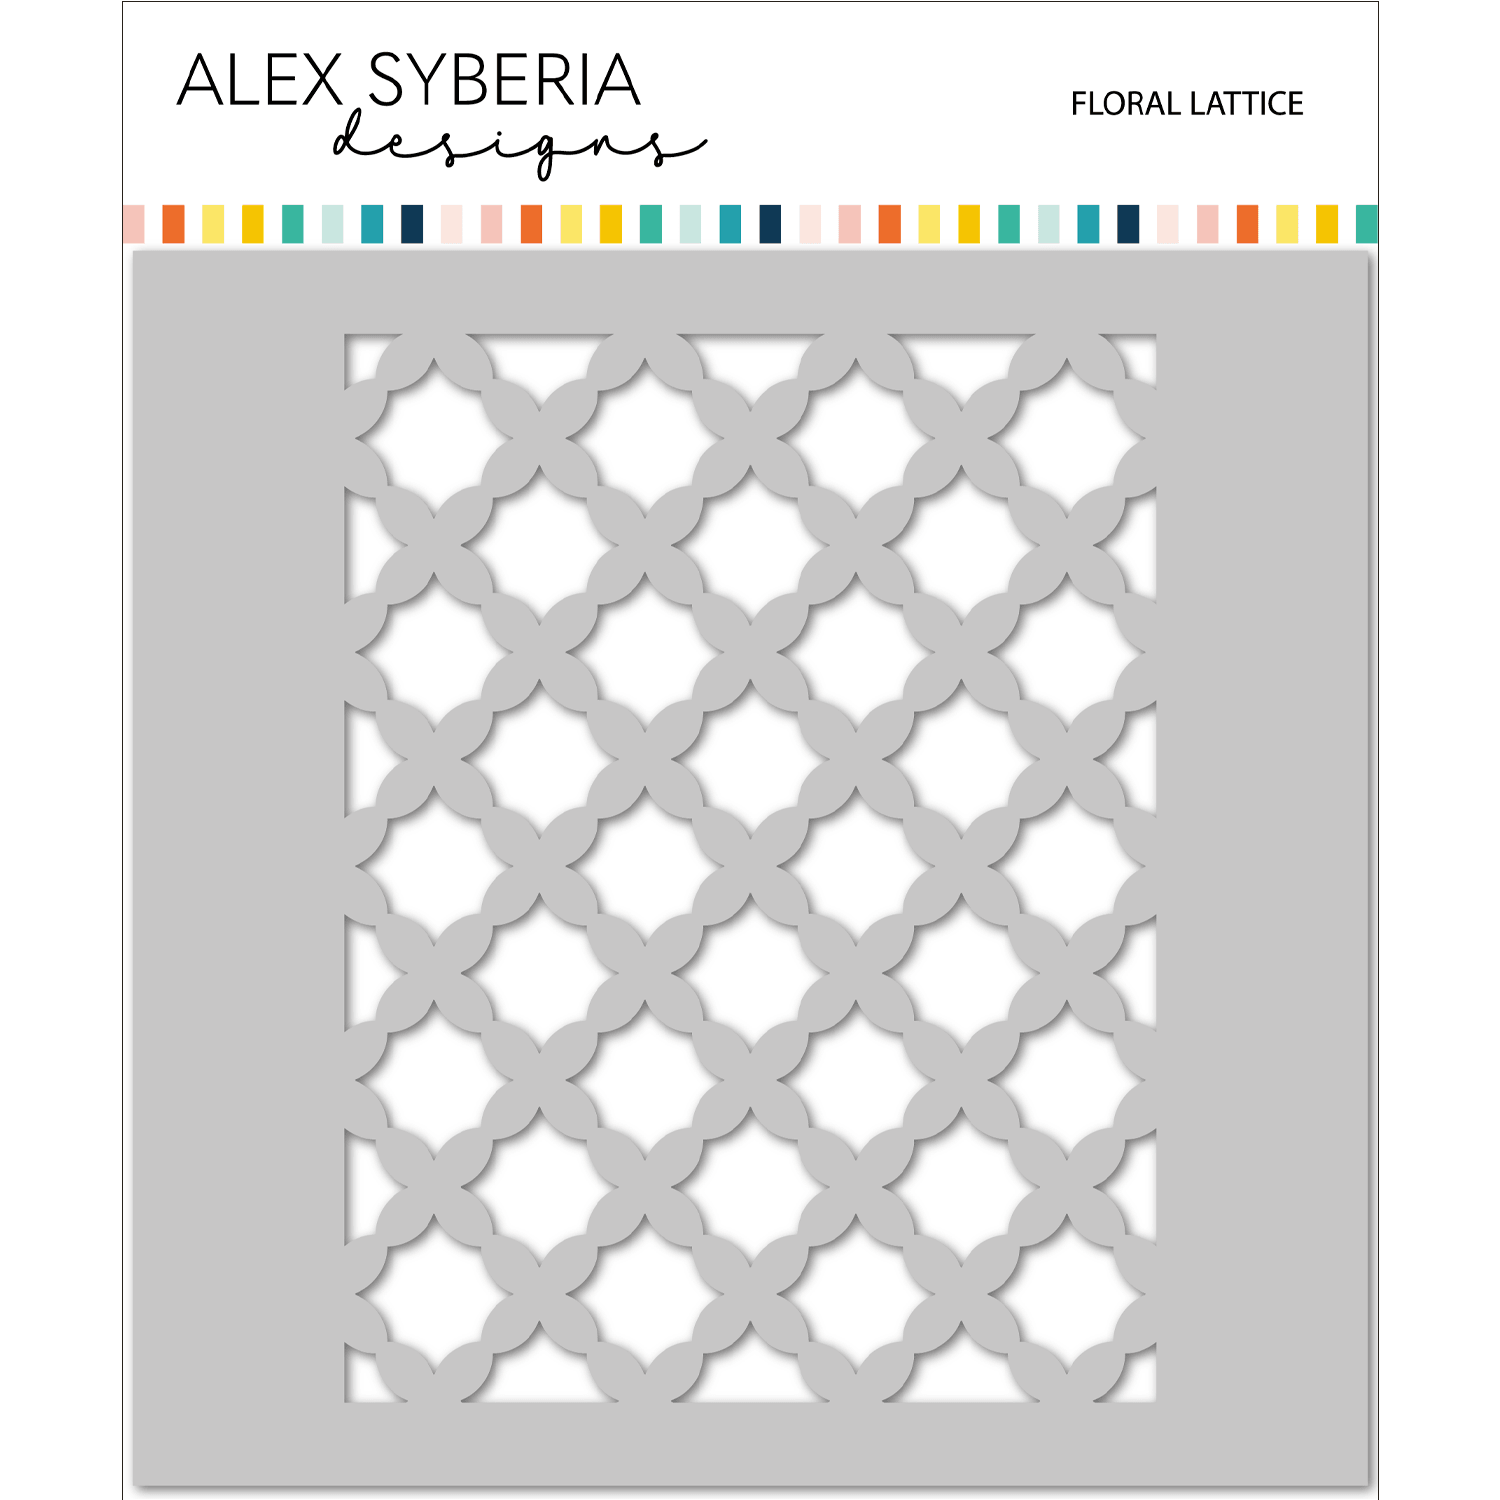 floral-lattice-stencil-cardmaking-ideas-alex-syberia-designs-hand-made-cards-stamps-A2-cover-die-coloring-carmaking-shop